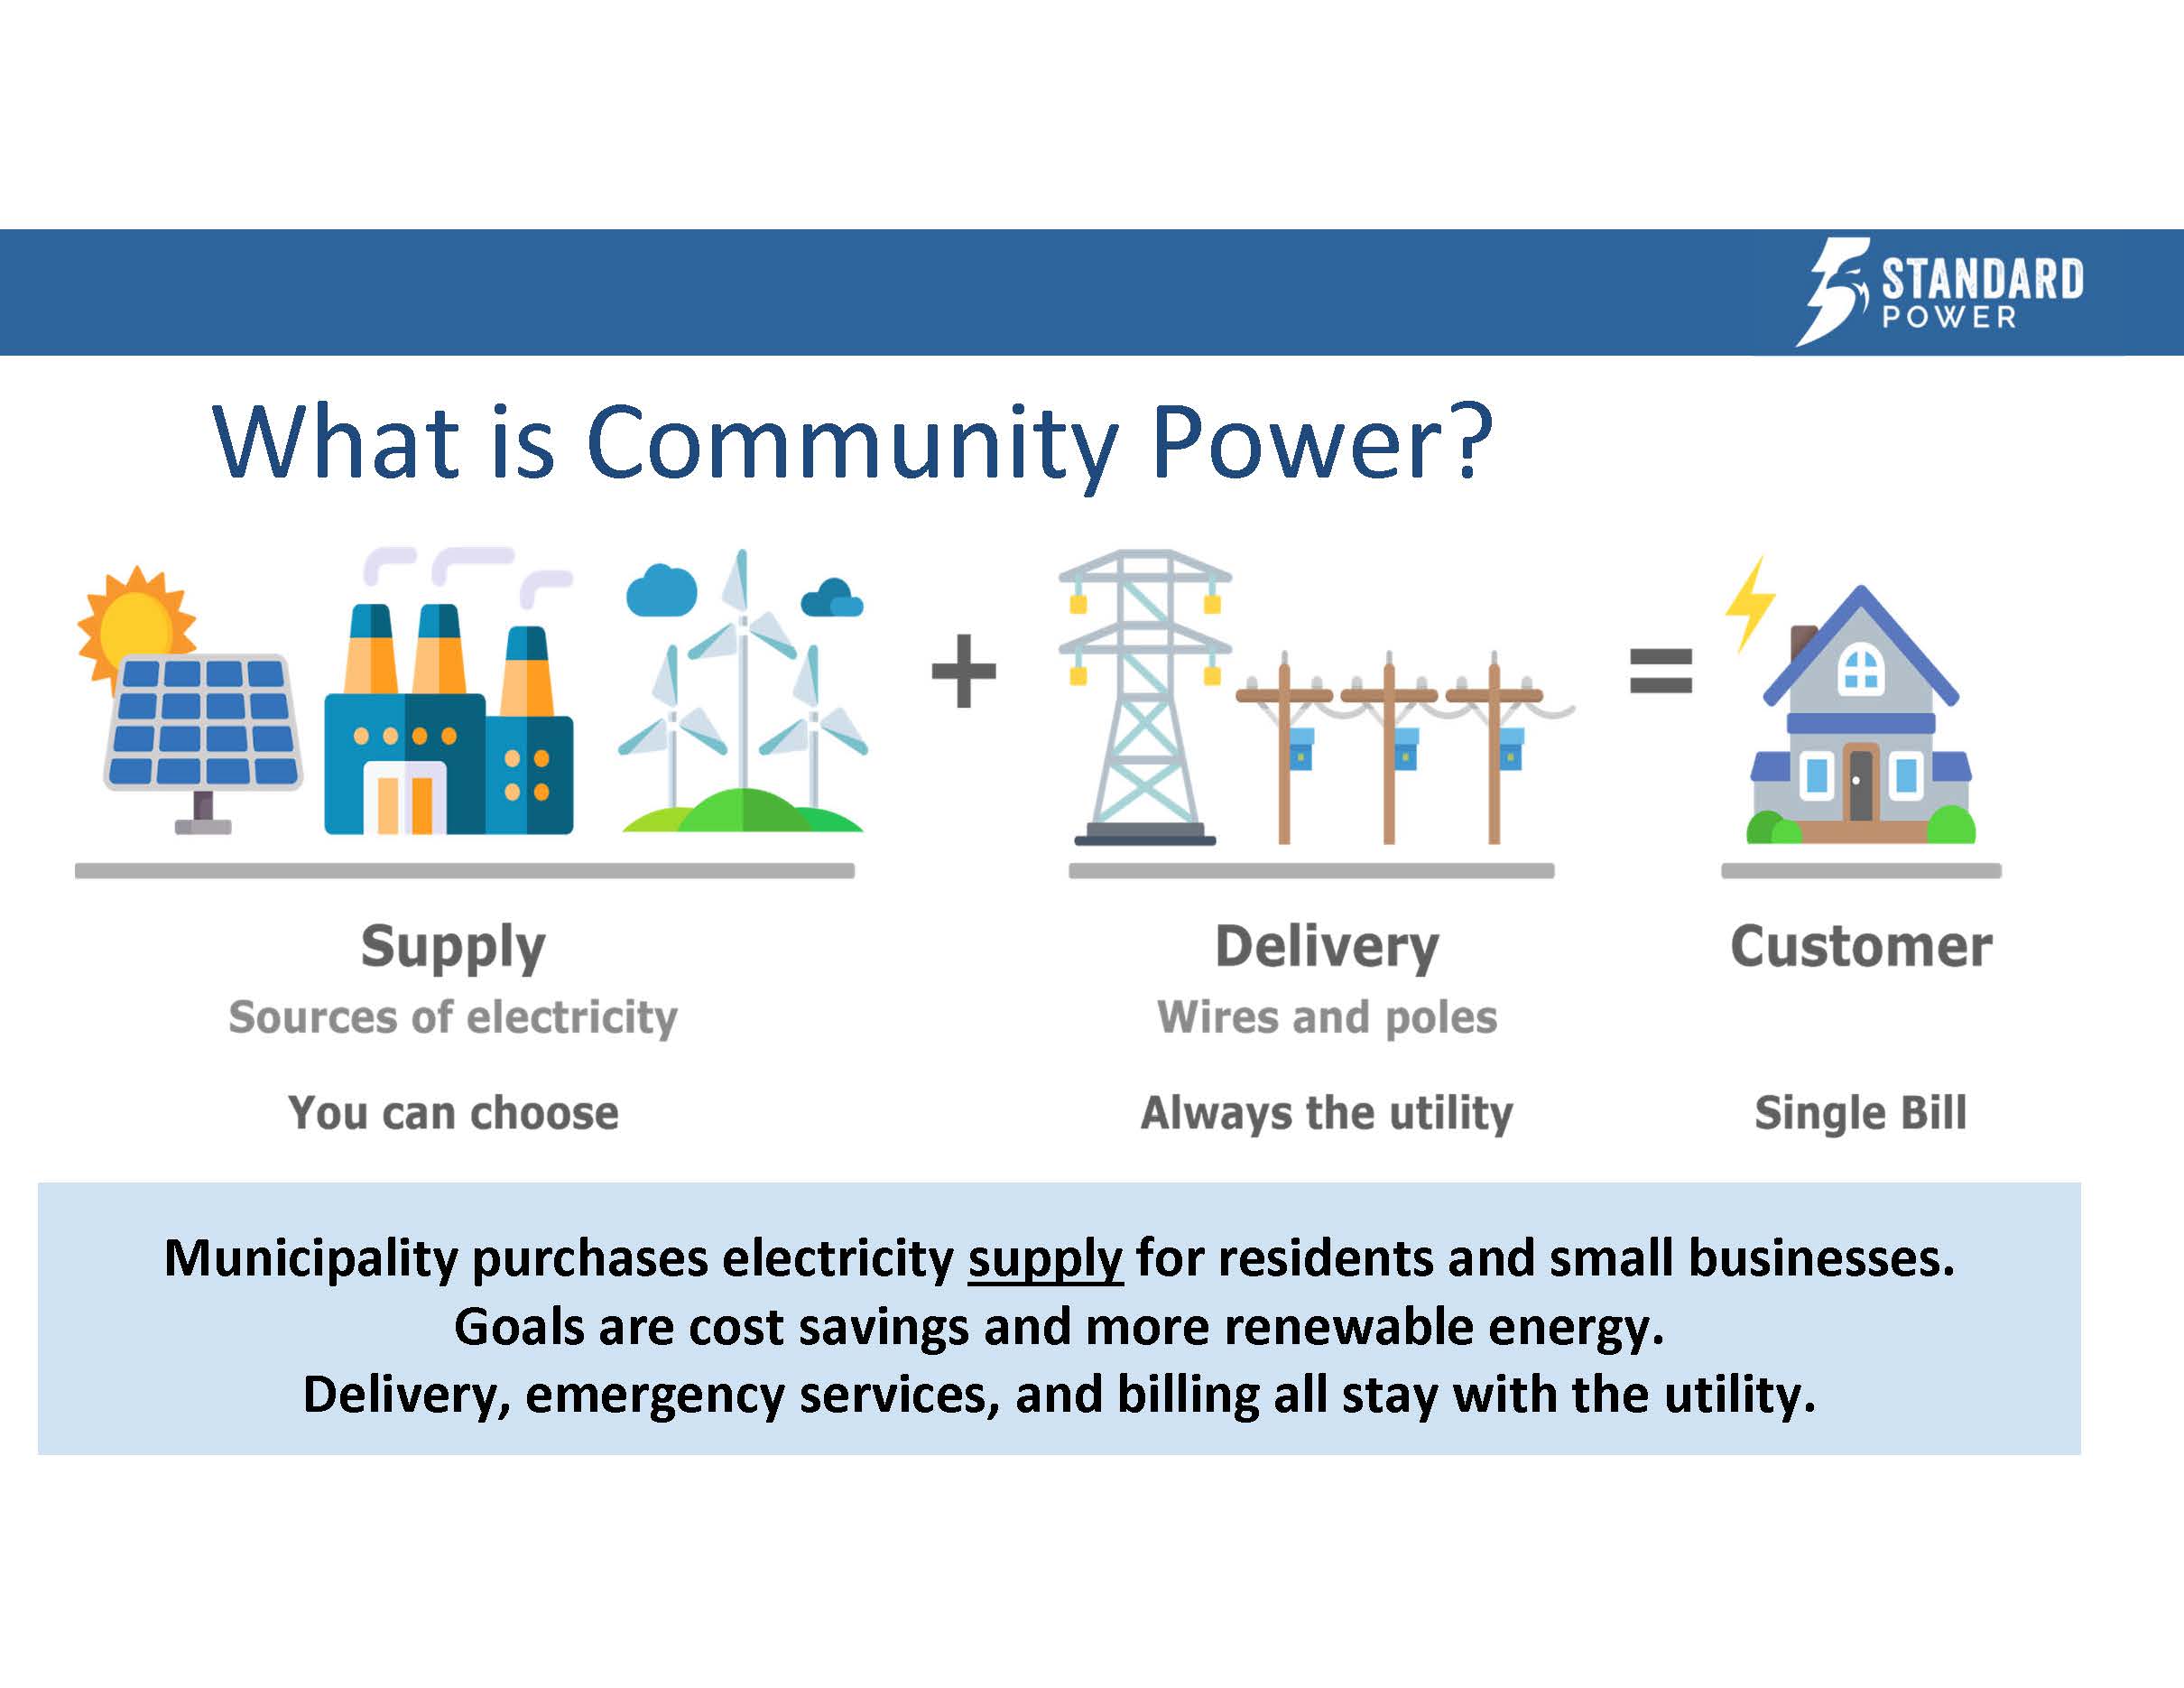 What is Community Power - Supply, Delivery and Customers Iconagraphy